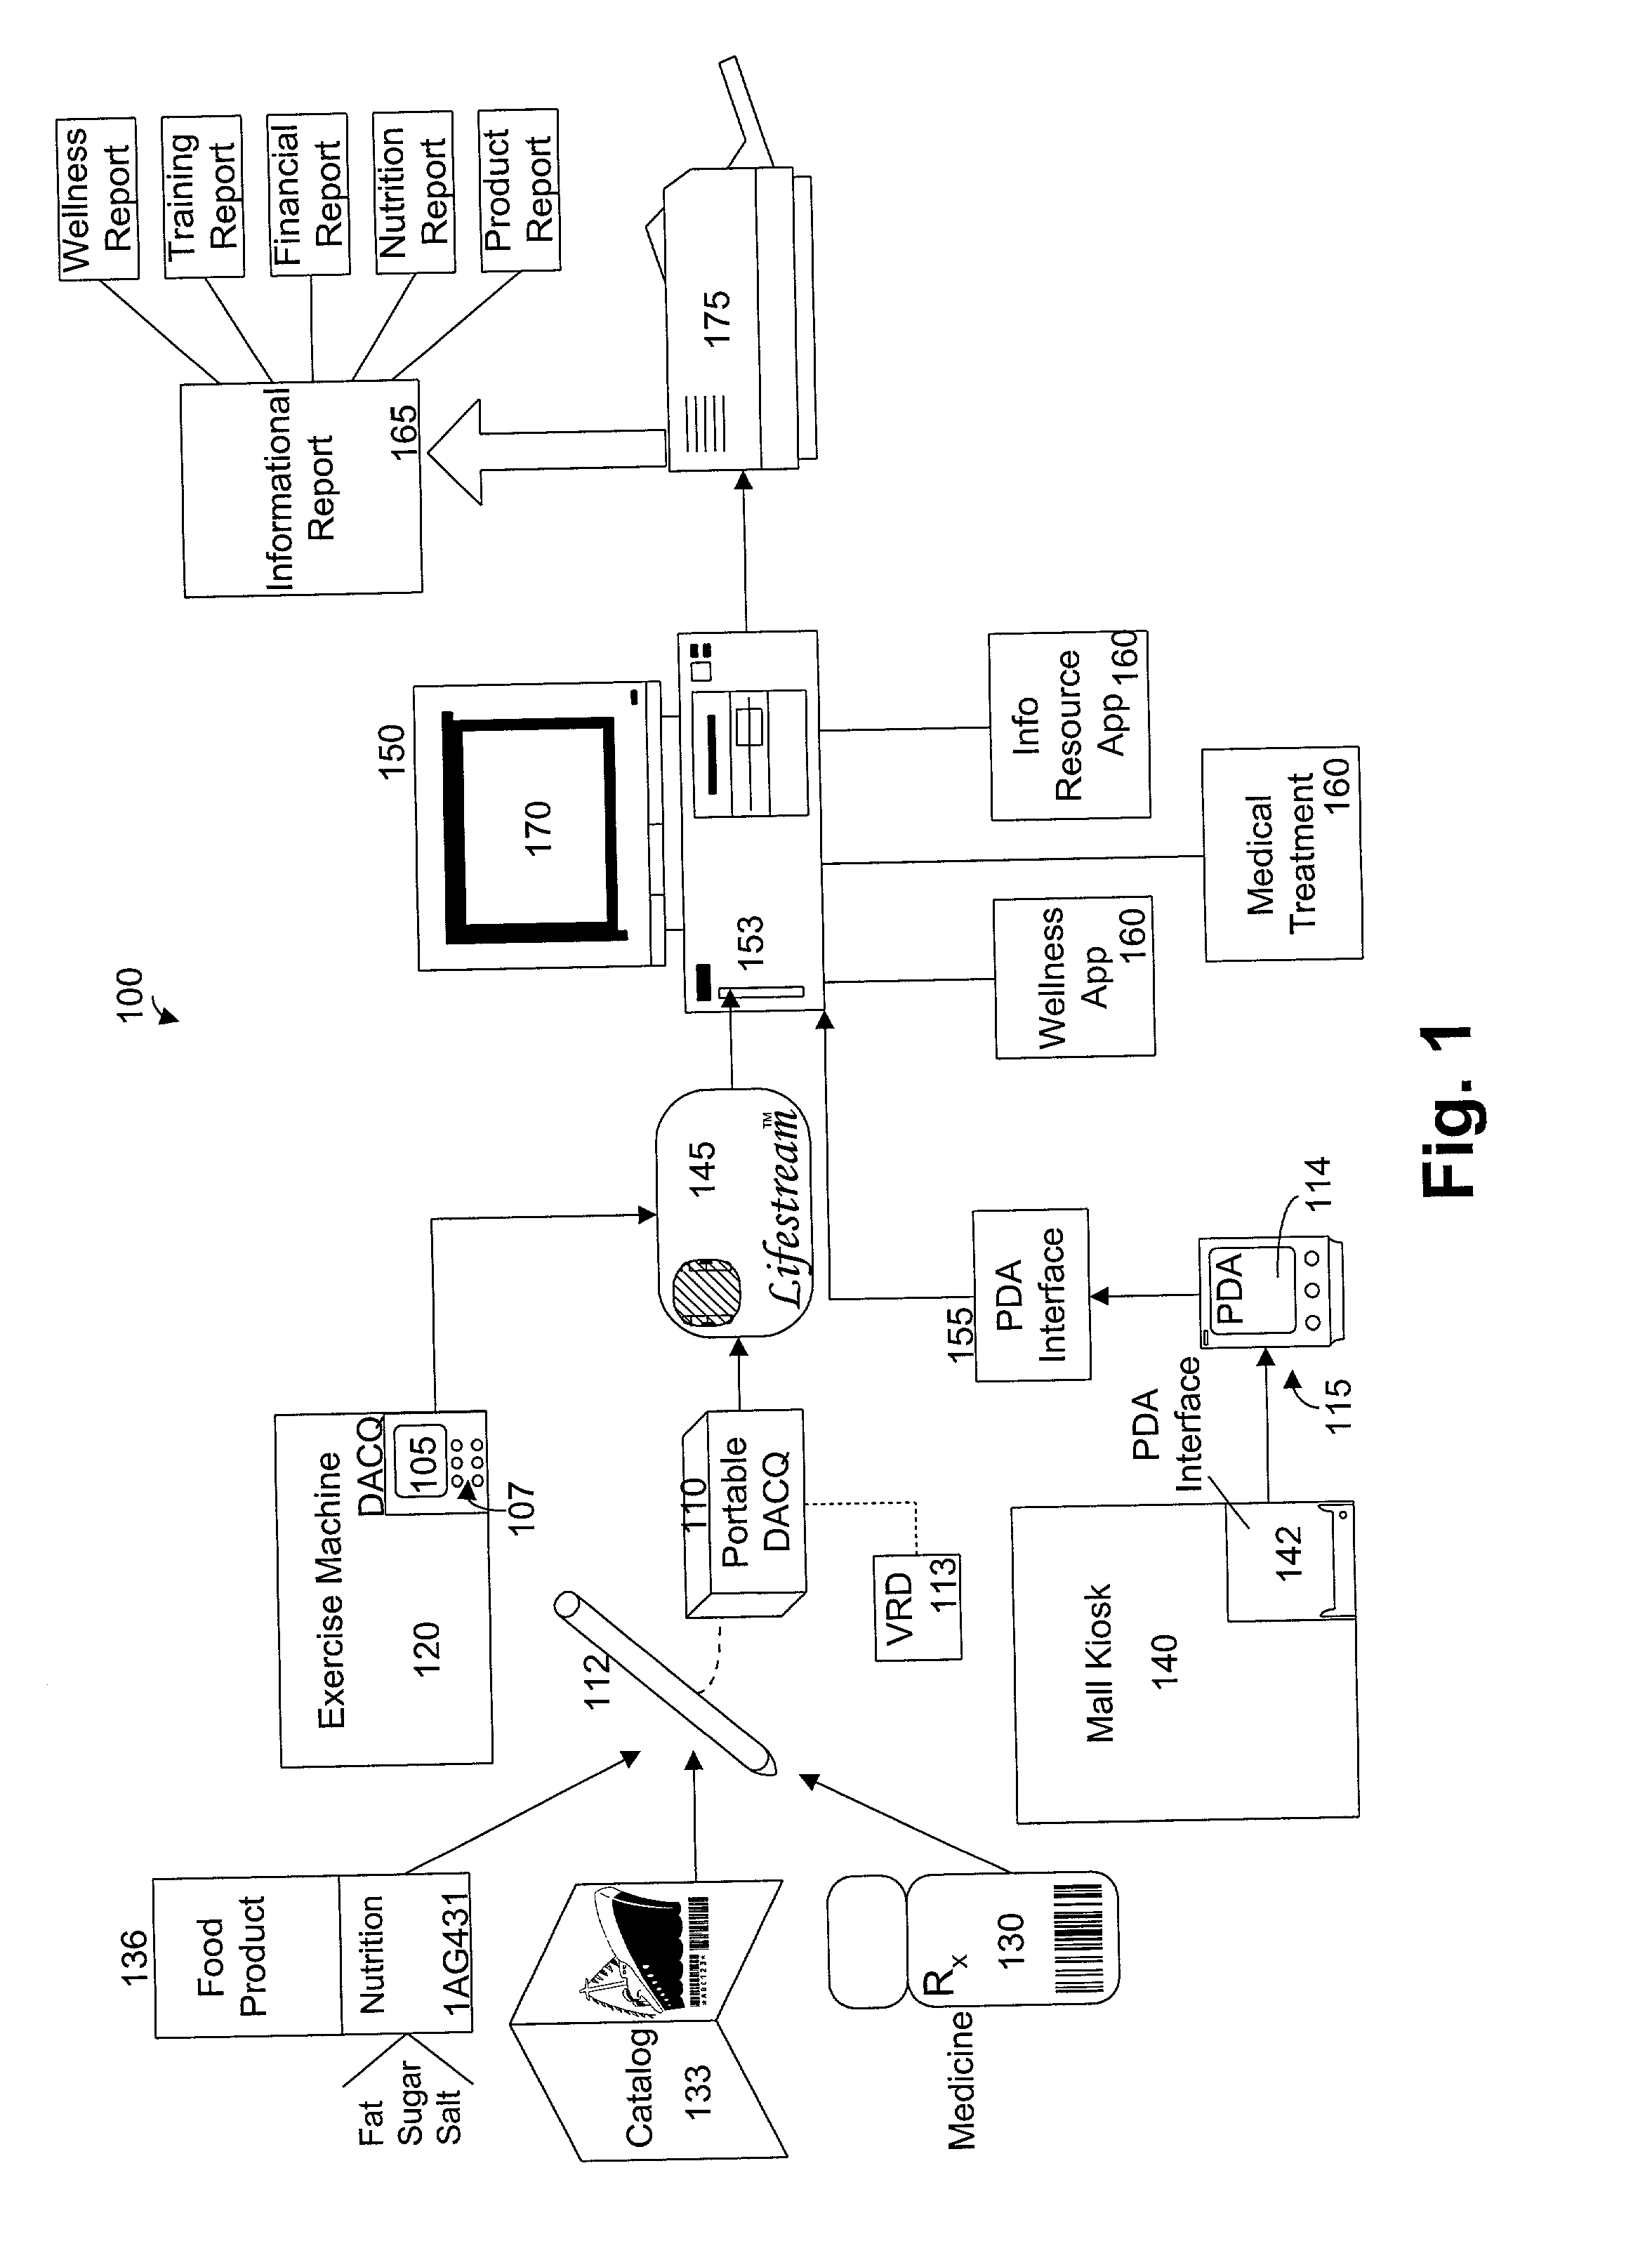 Computerized information processing and retrieval system